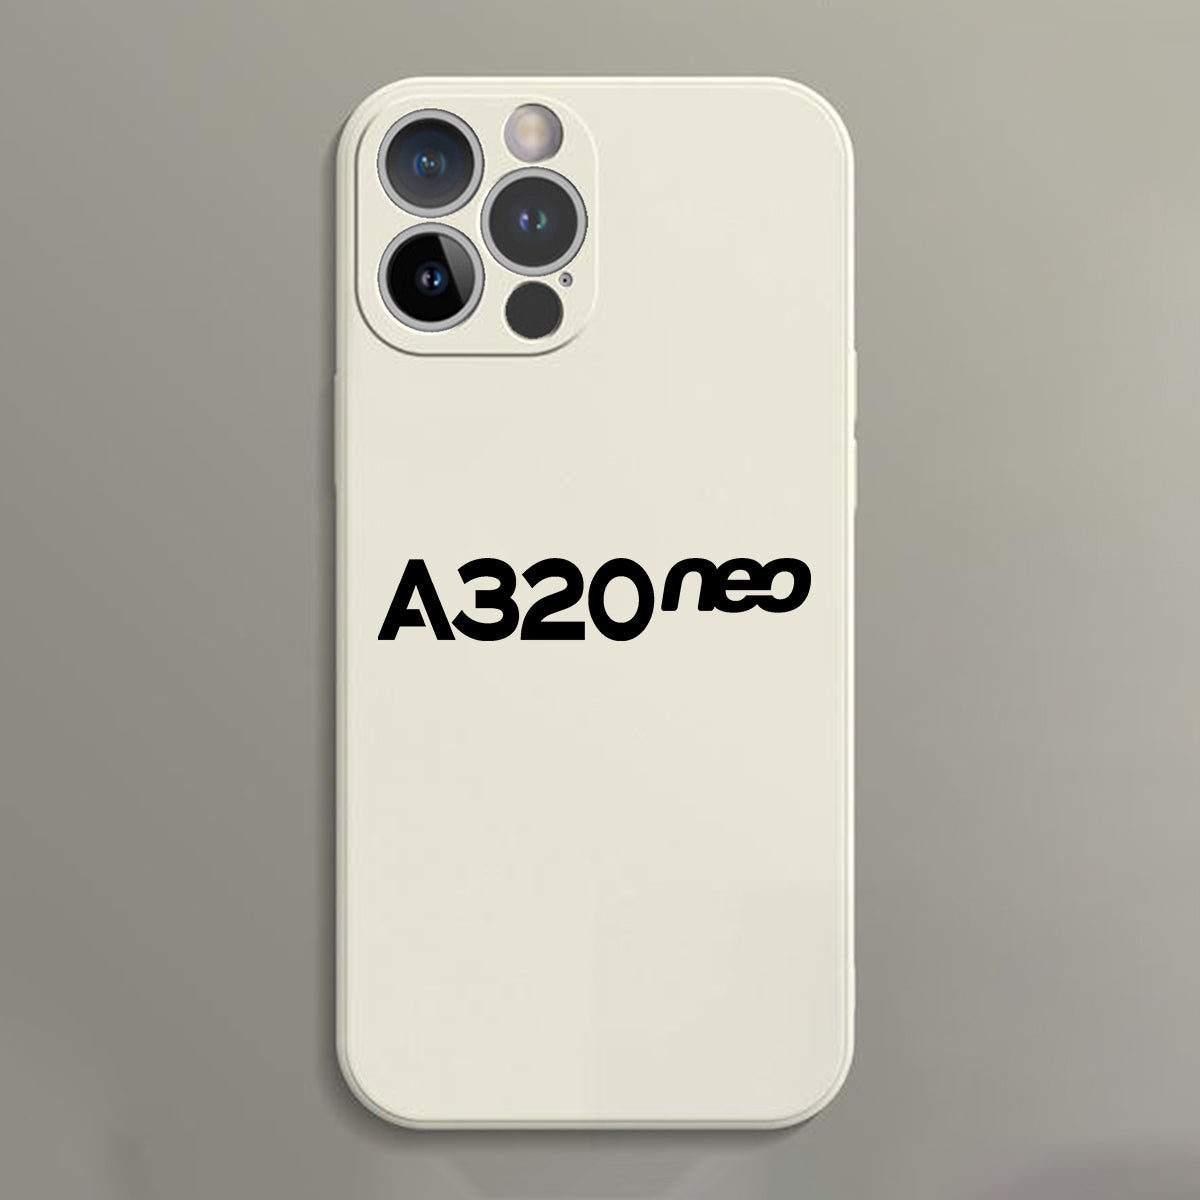 A320neo & Text Designed Soft Silicone iPhone Cases